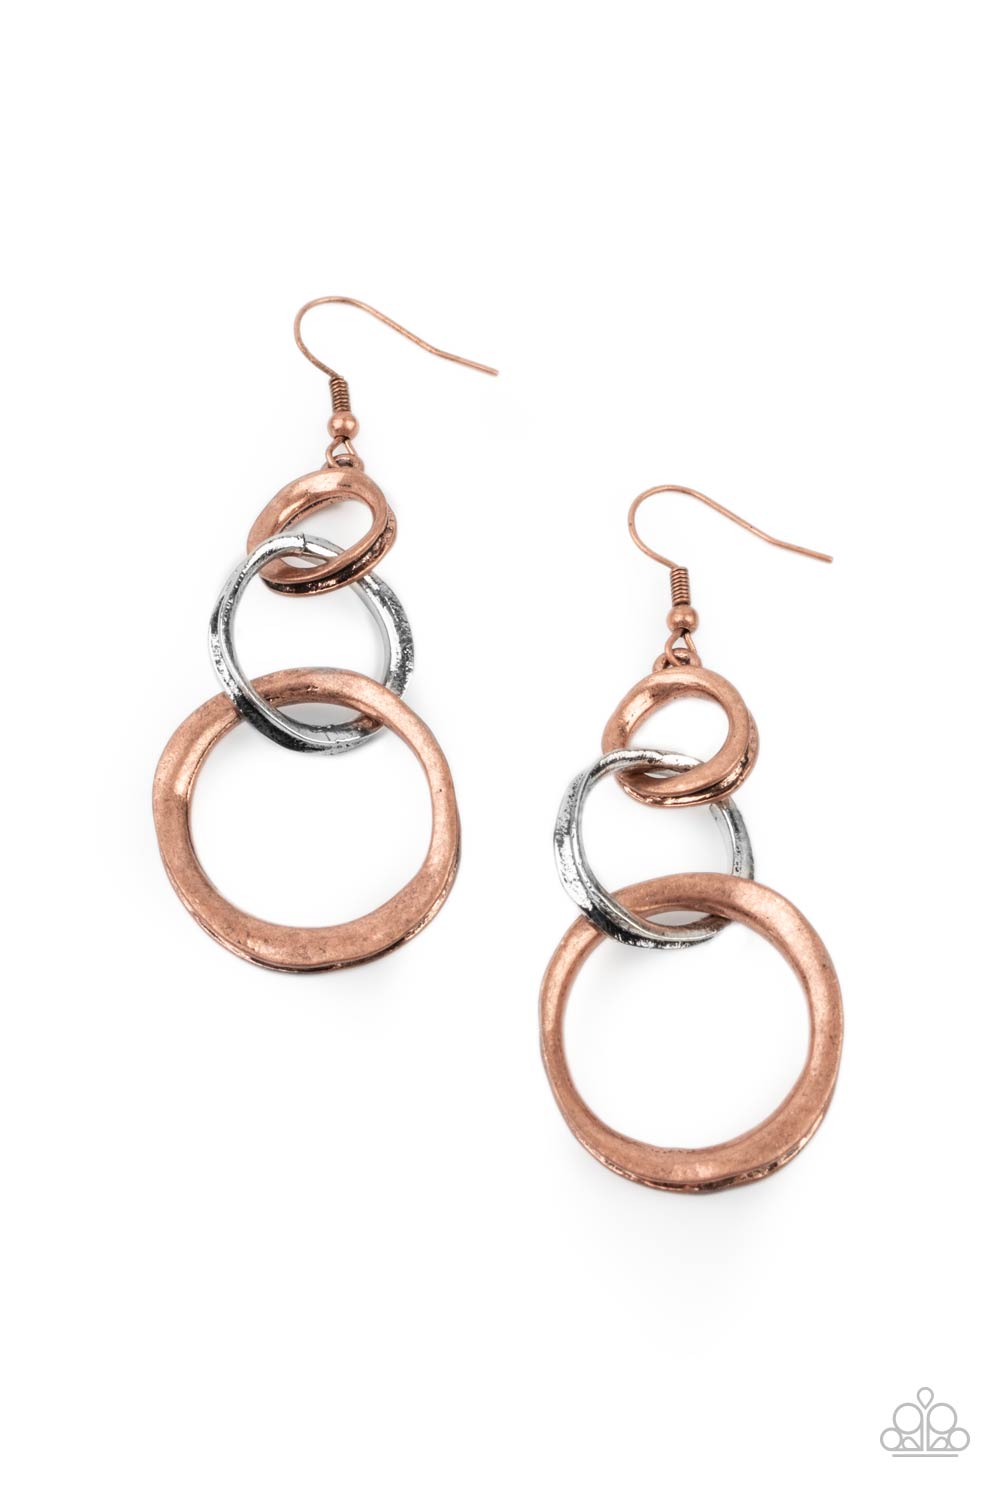 Harmoniously Handcrafted - Copper Earrings - Paparazzi Accessories